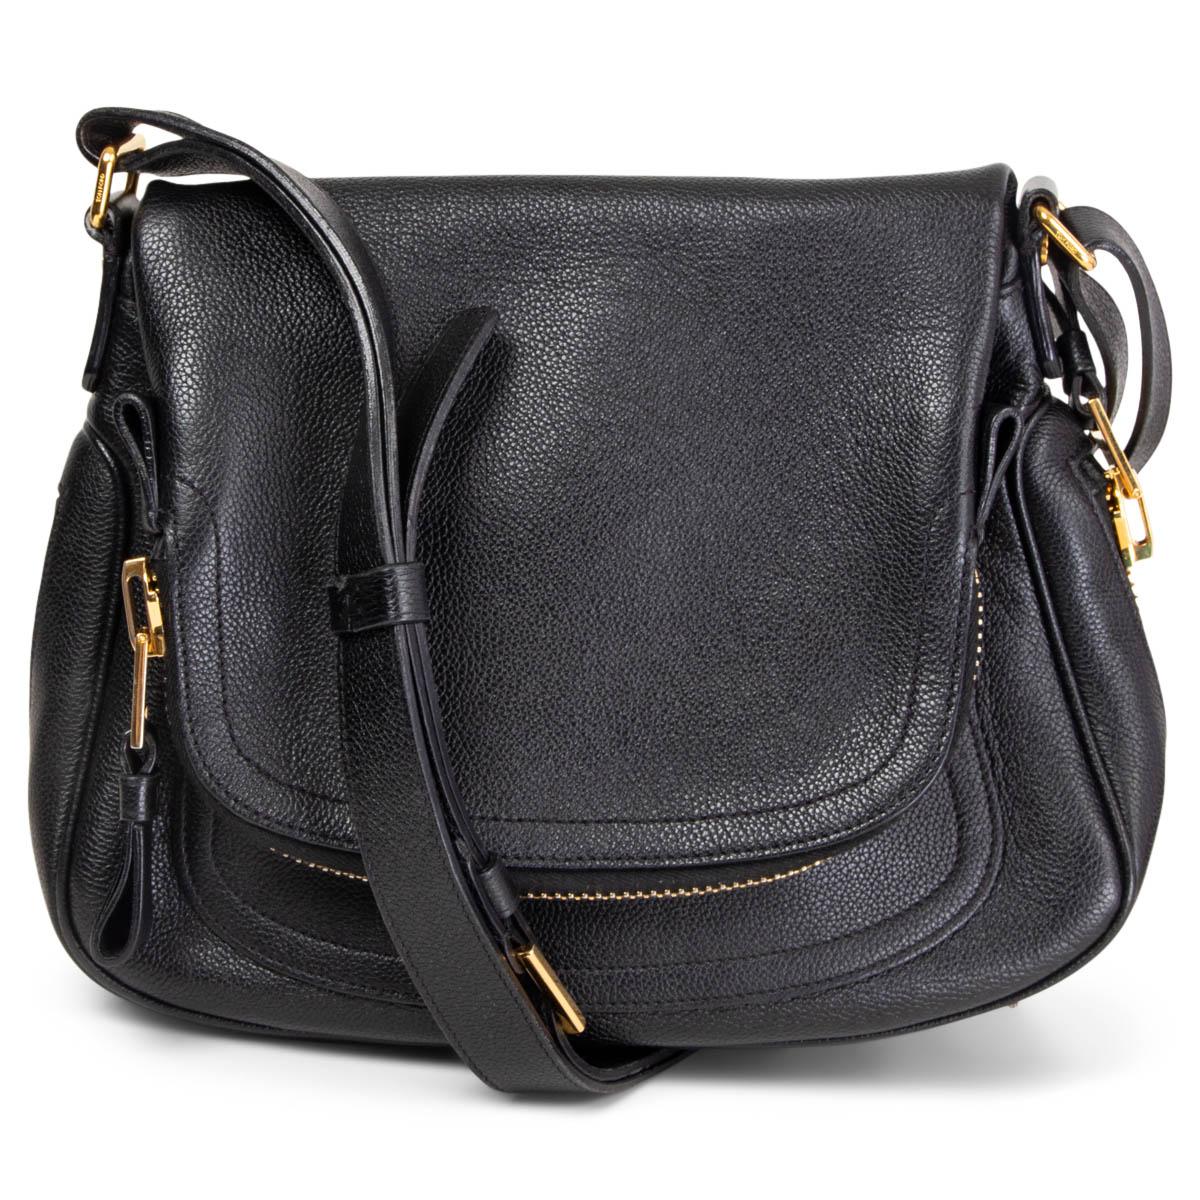 100% authentic Tom Ford 'Jennifer Medium' crossbody bag in black grained leather. Adjustable shoulder strap. Expandable zipper gusset. Zipper pocket flap with open pocket on the front under the flap. Lined in black suede with a zipper pocket against